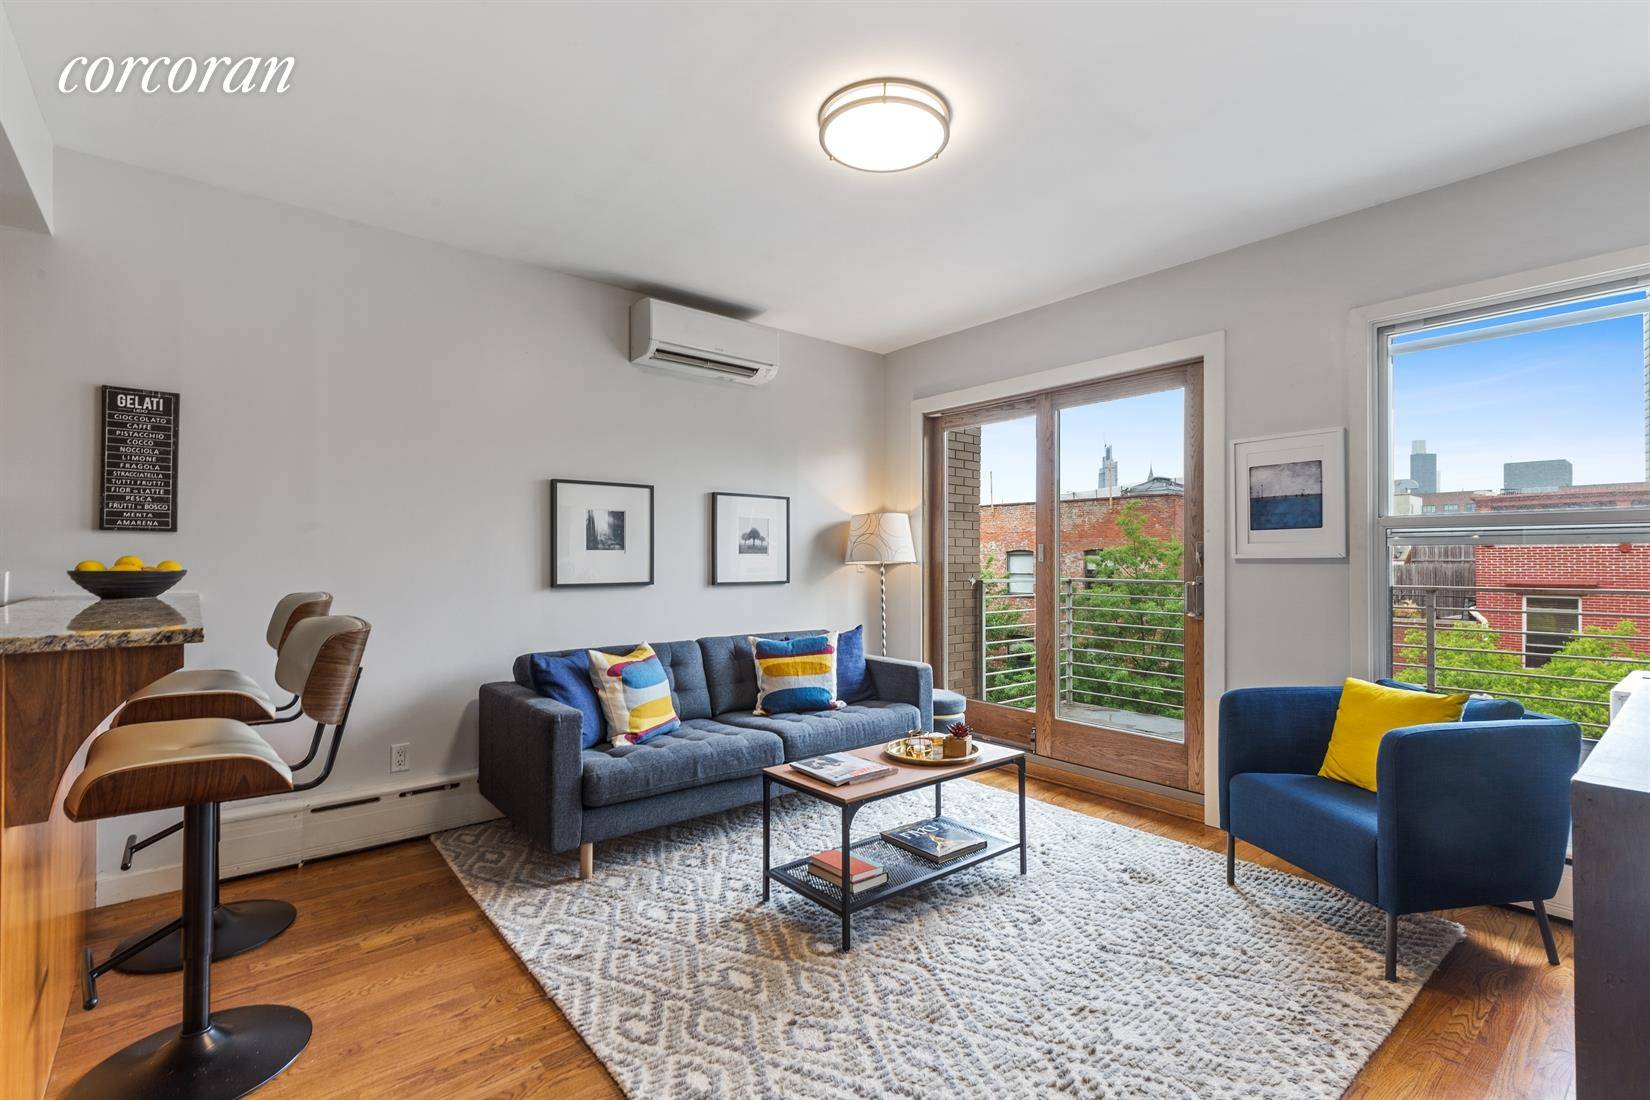 With TWO outdoor spaces, including a PRIVATE ROOF DECK measuring over 350 square feet with INSANELY FANTASTIC views of the Manhattan Skyline, this lovely two bedroom condo can serve as ...